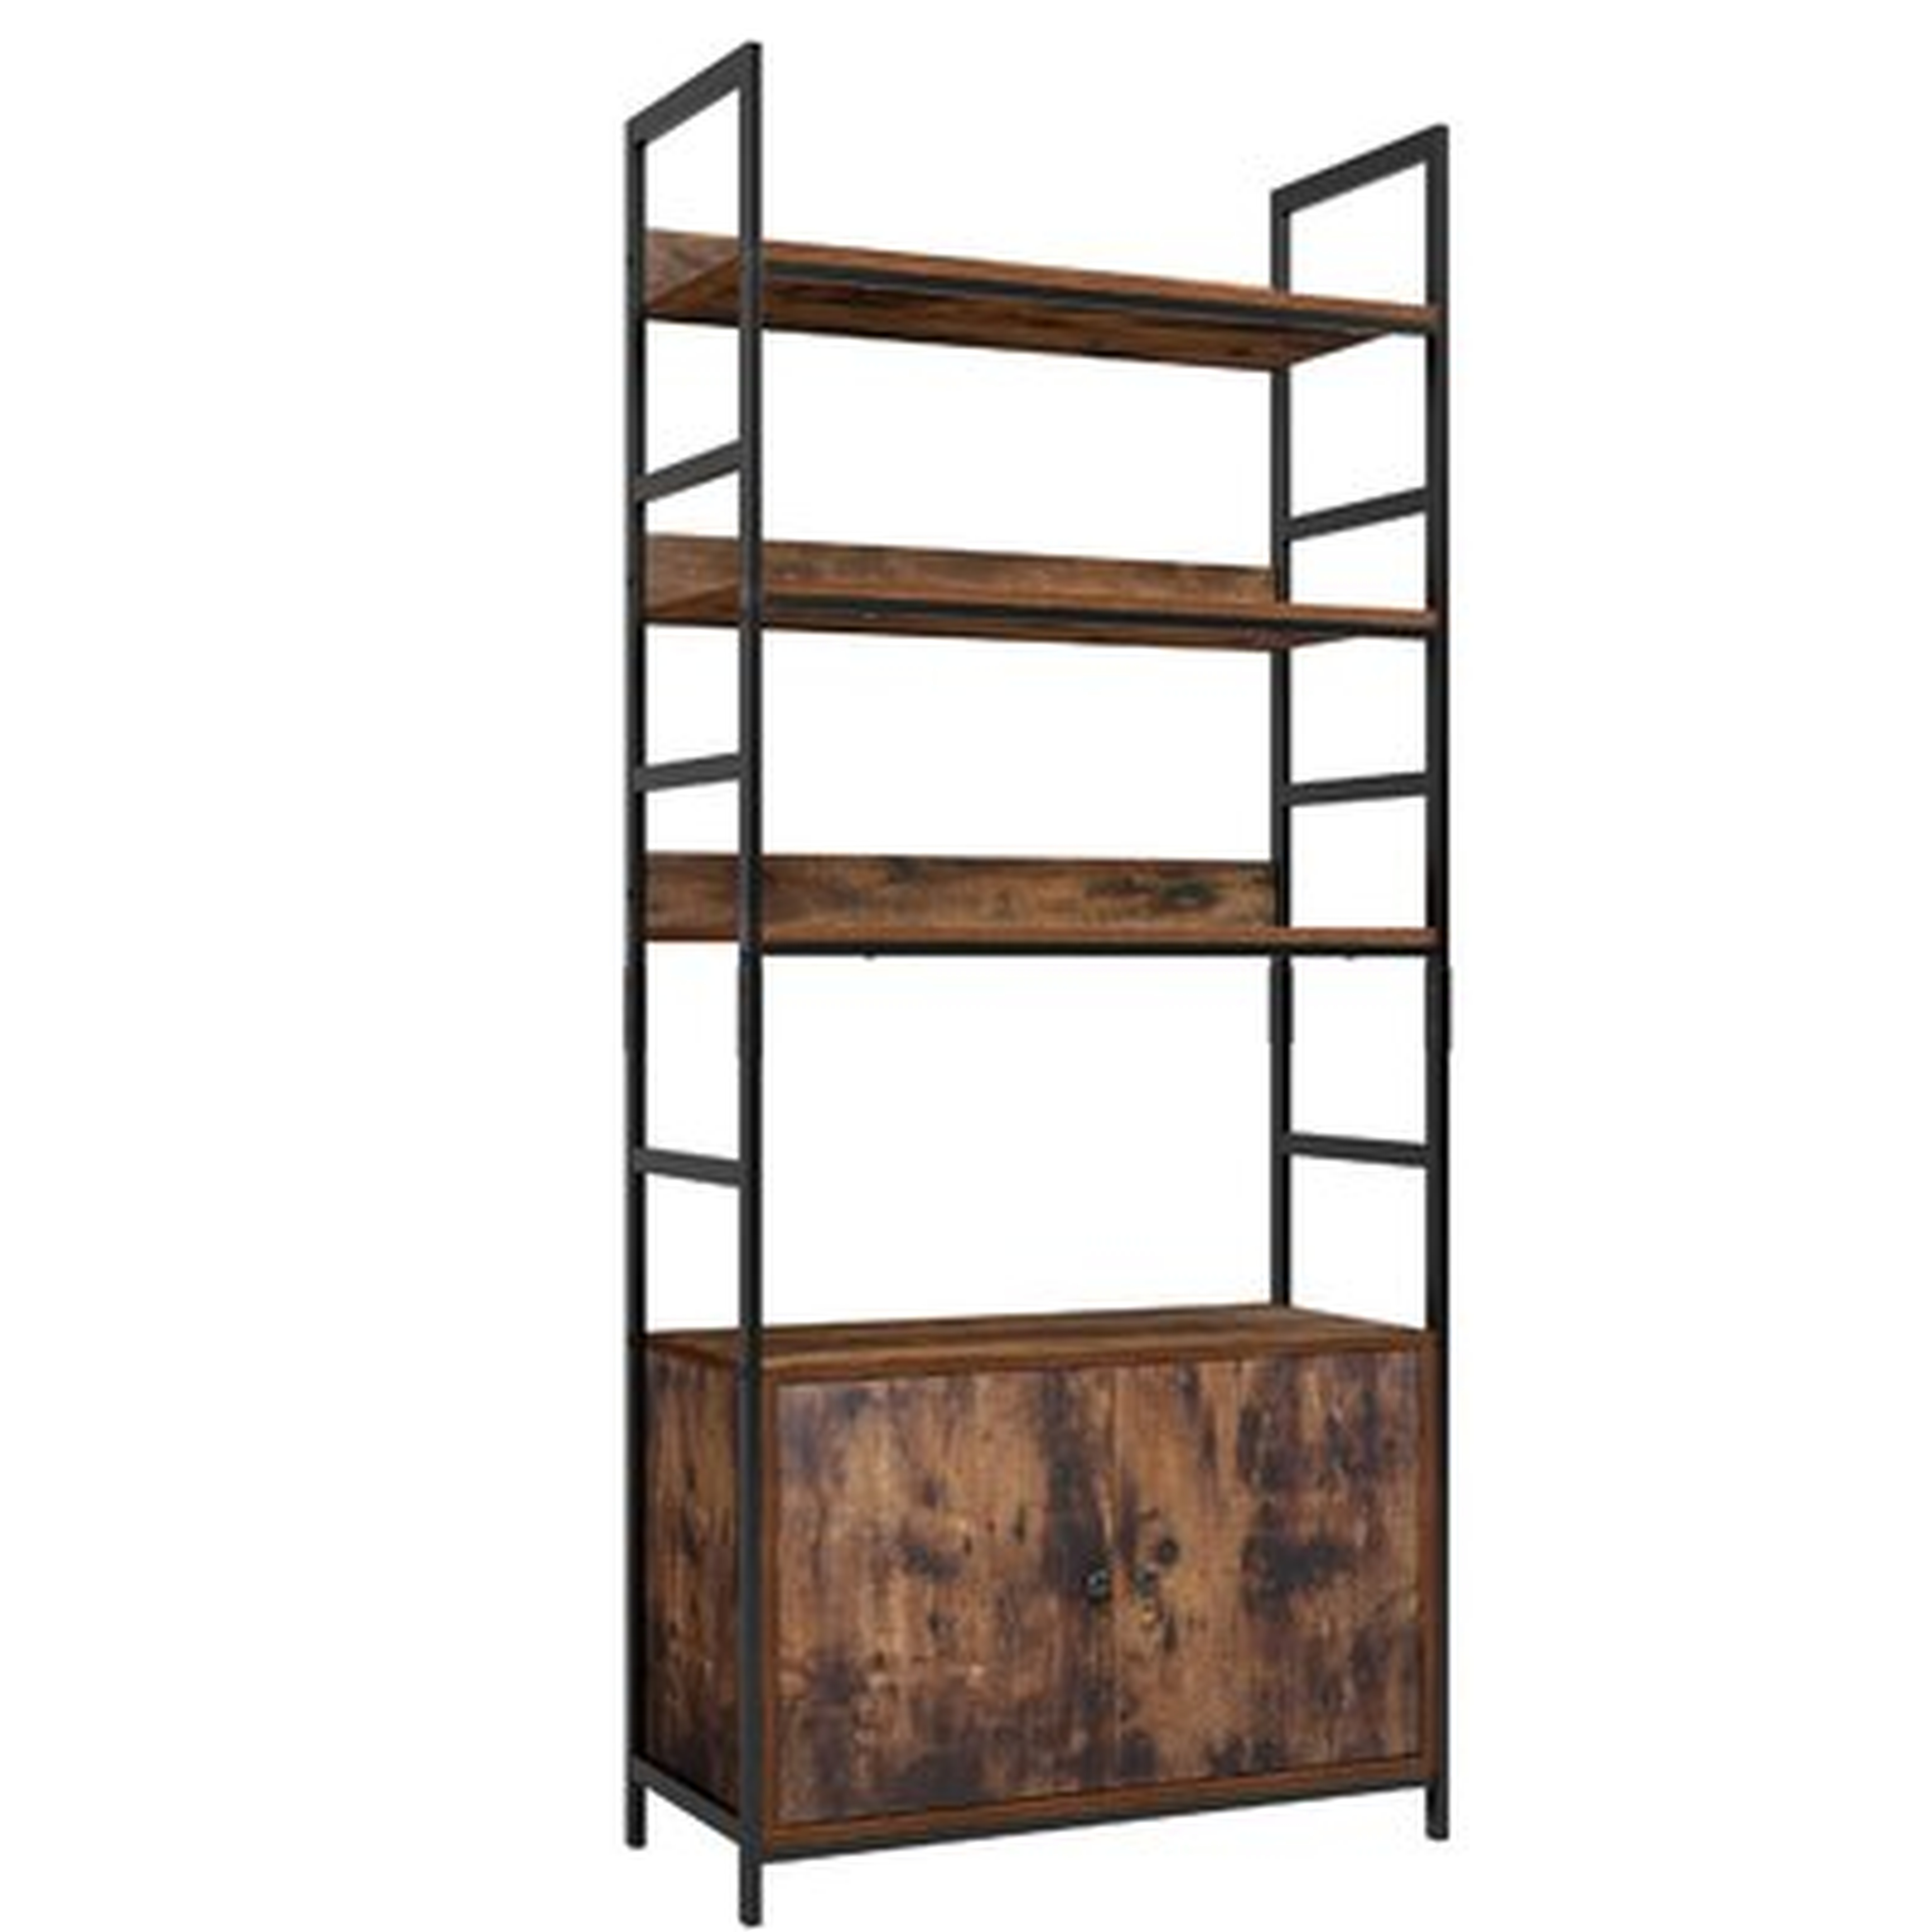 Industrial Bookcase With 2 Cabinets, 3-Tier Free Standing Open Shelf Display Storage Rack Shelves, 31L X 11.8W X 70.8H Inches Wood Look Accent Metal Frame Furniture For Home Office - Wayfair